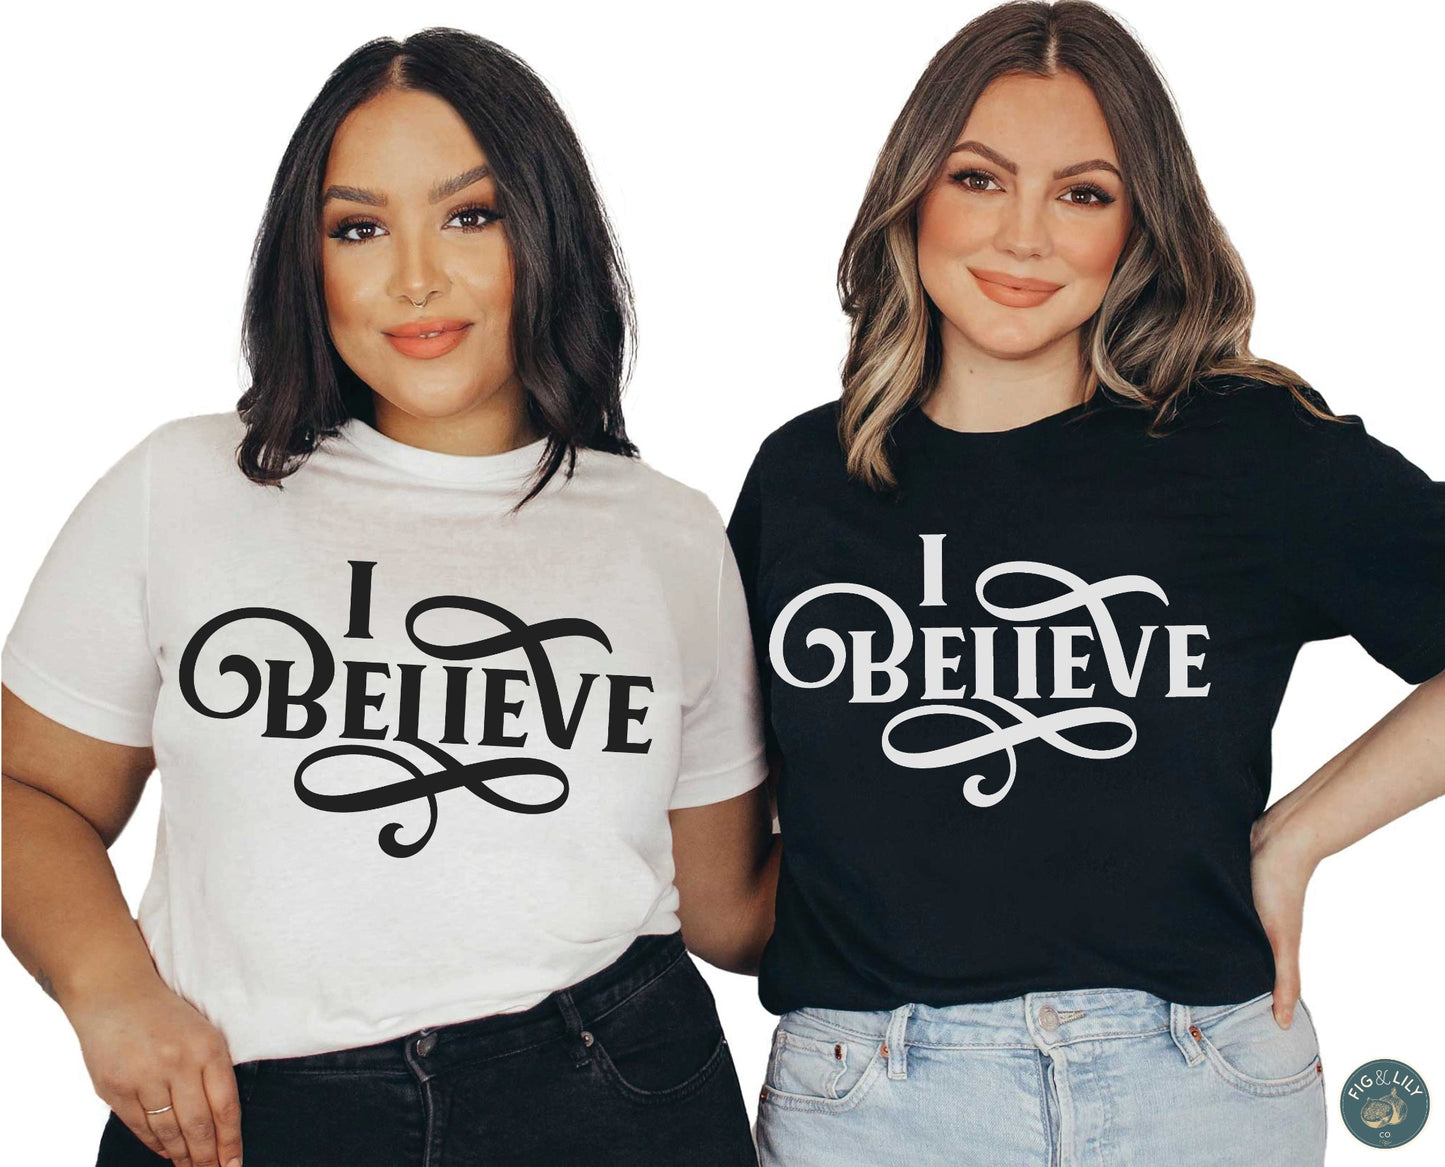 I Believe Christian aesthetic Jesus believer sister's in Christ t-shirt in black and white swirl design great gift for her